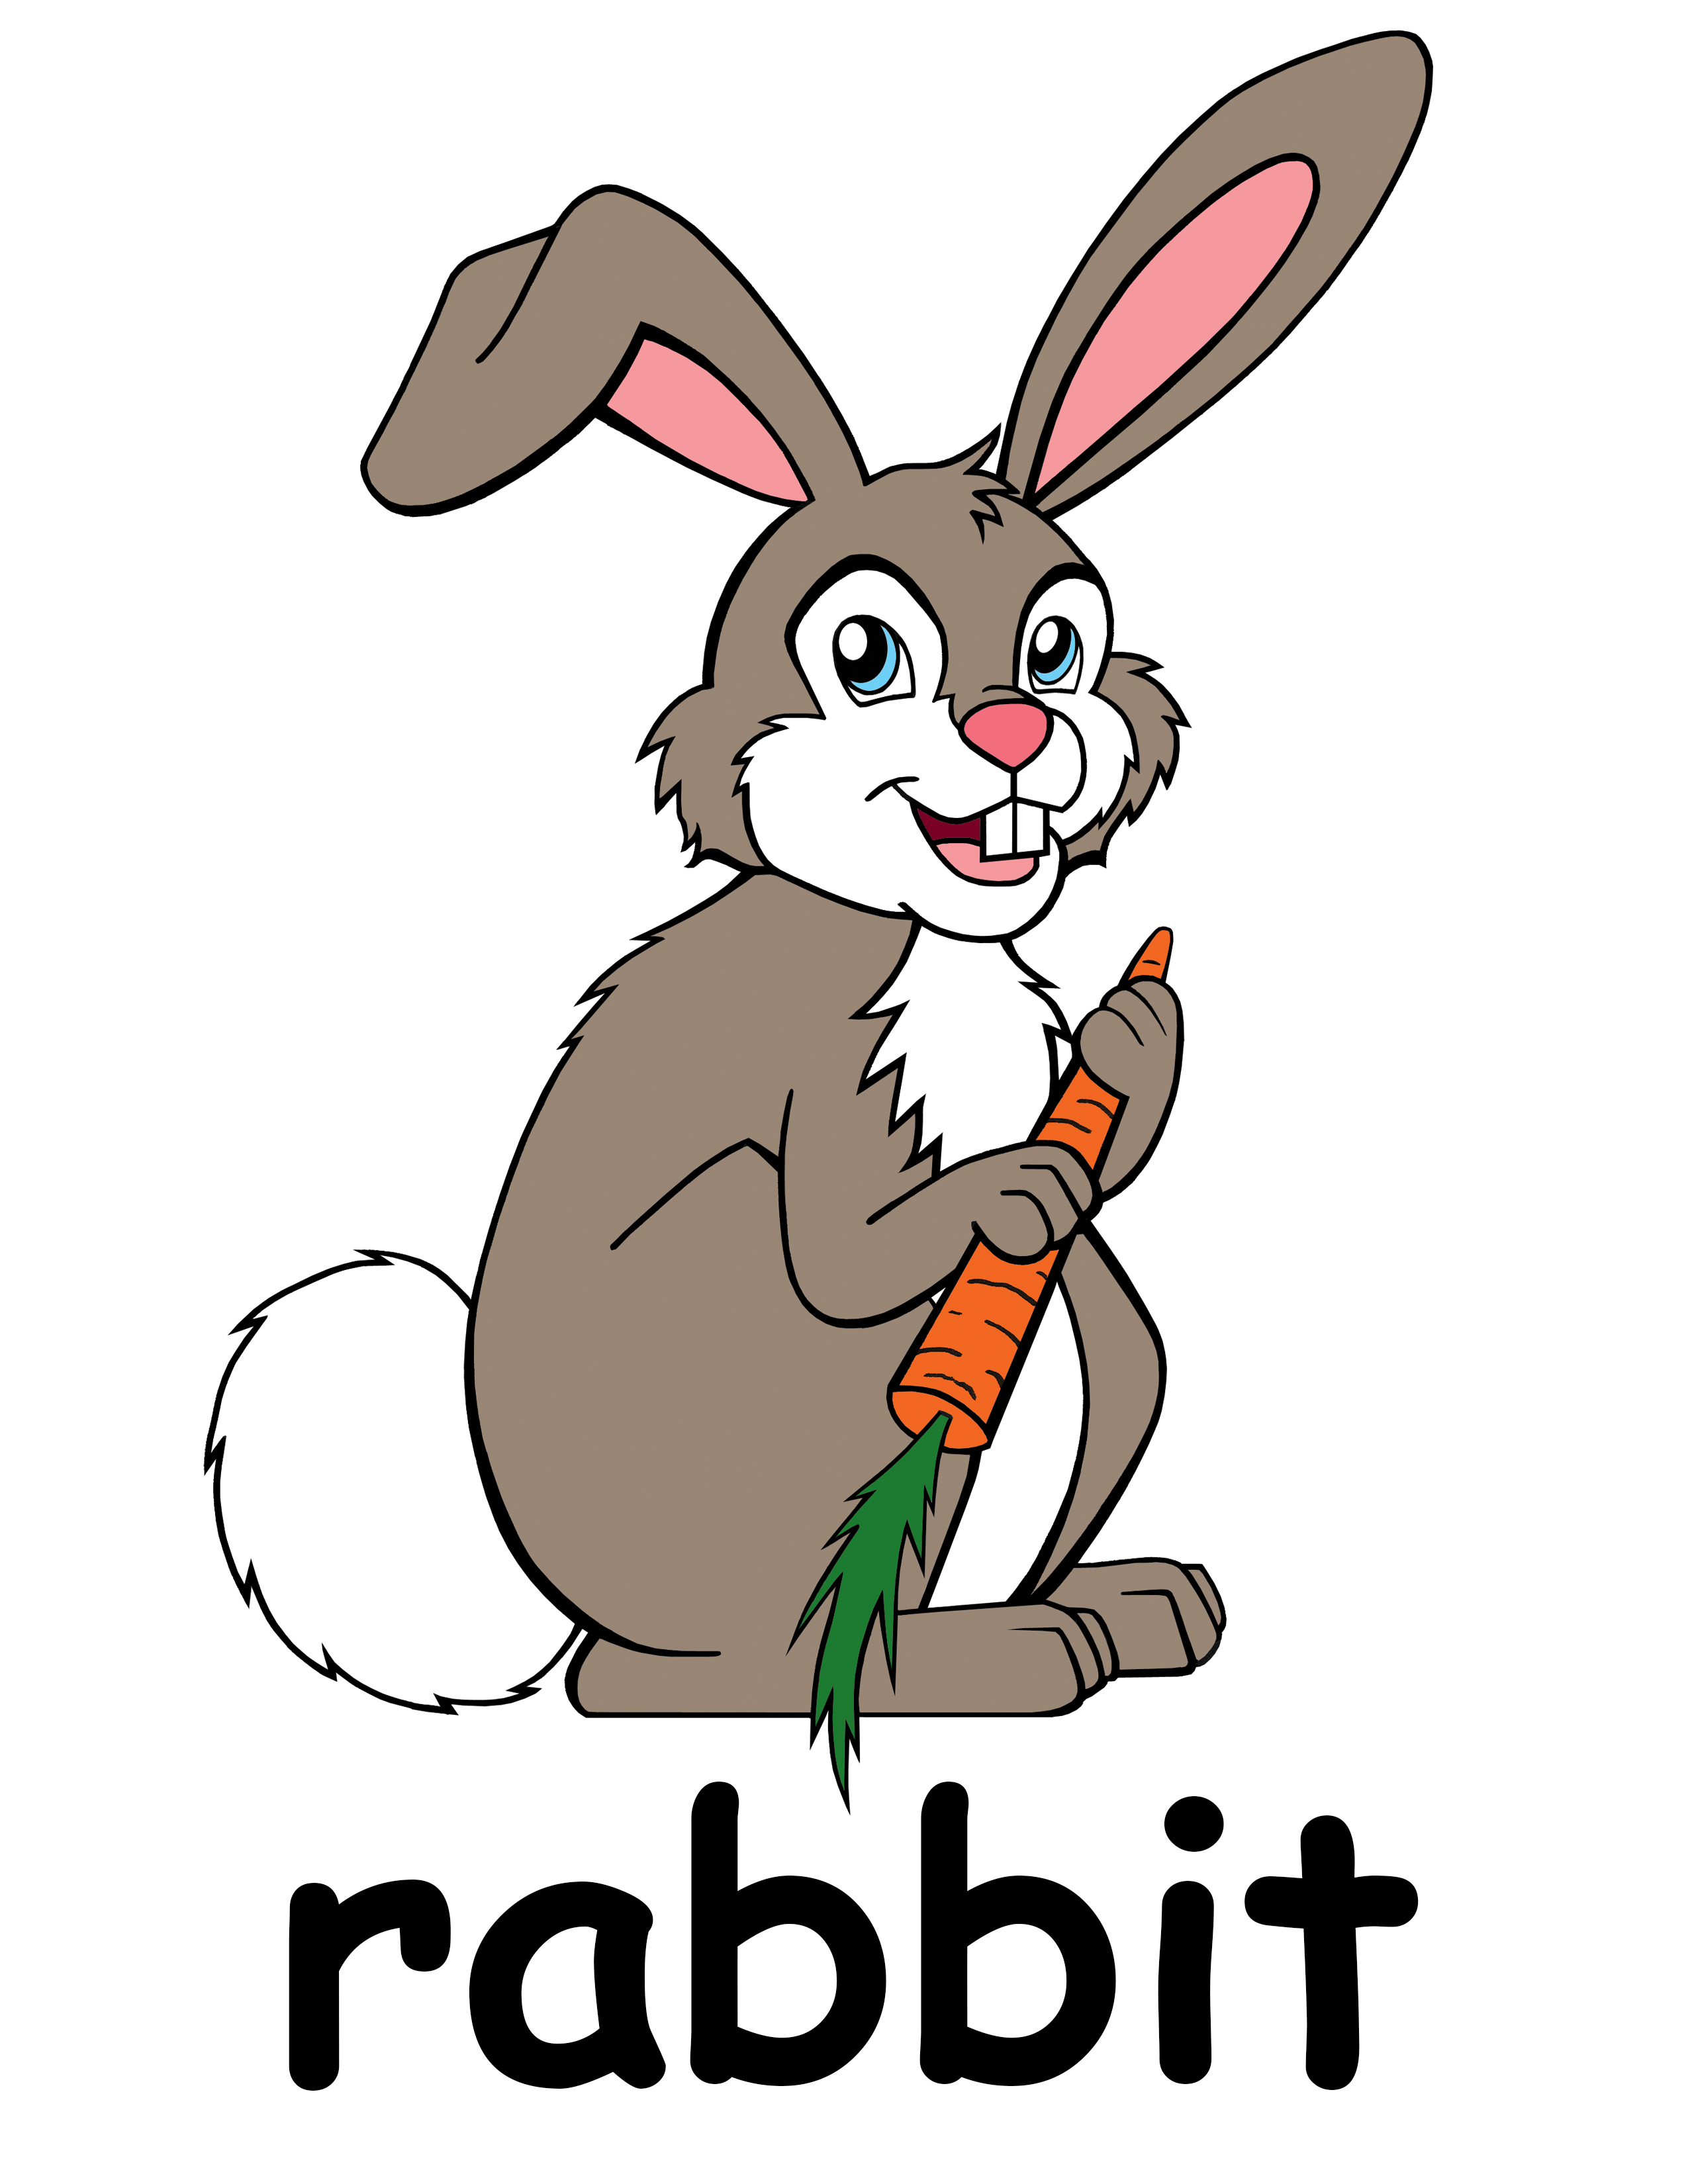 Rabbit clipart clipart cliparts for you 2